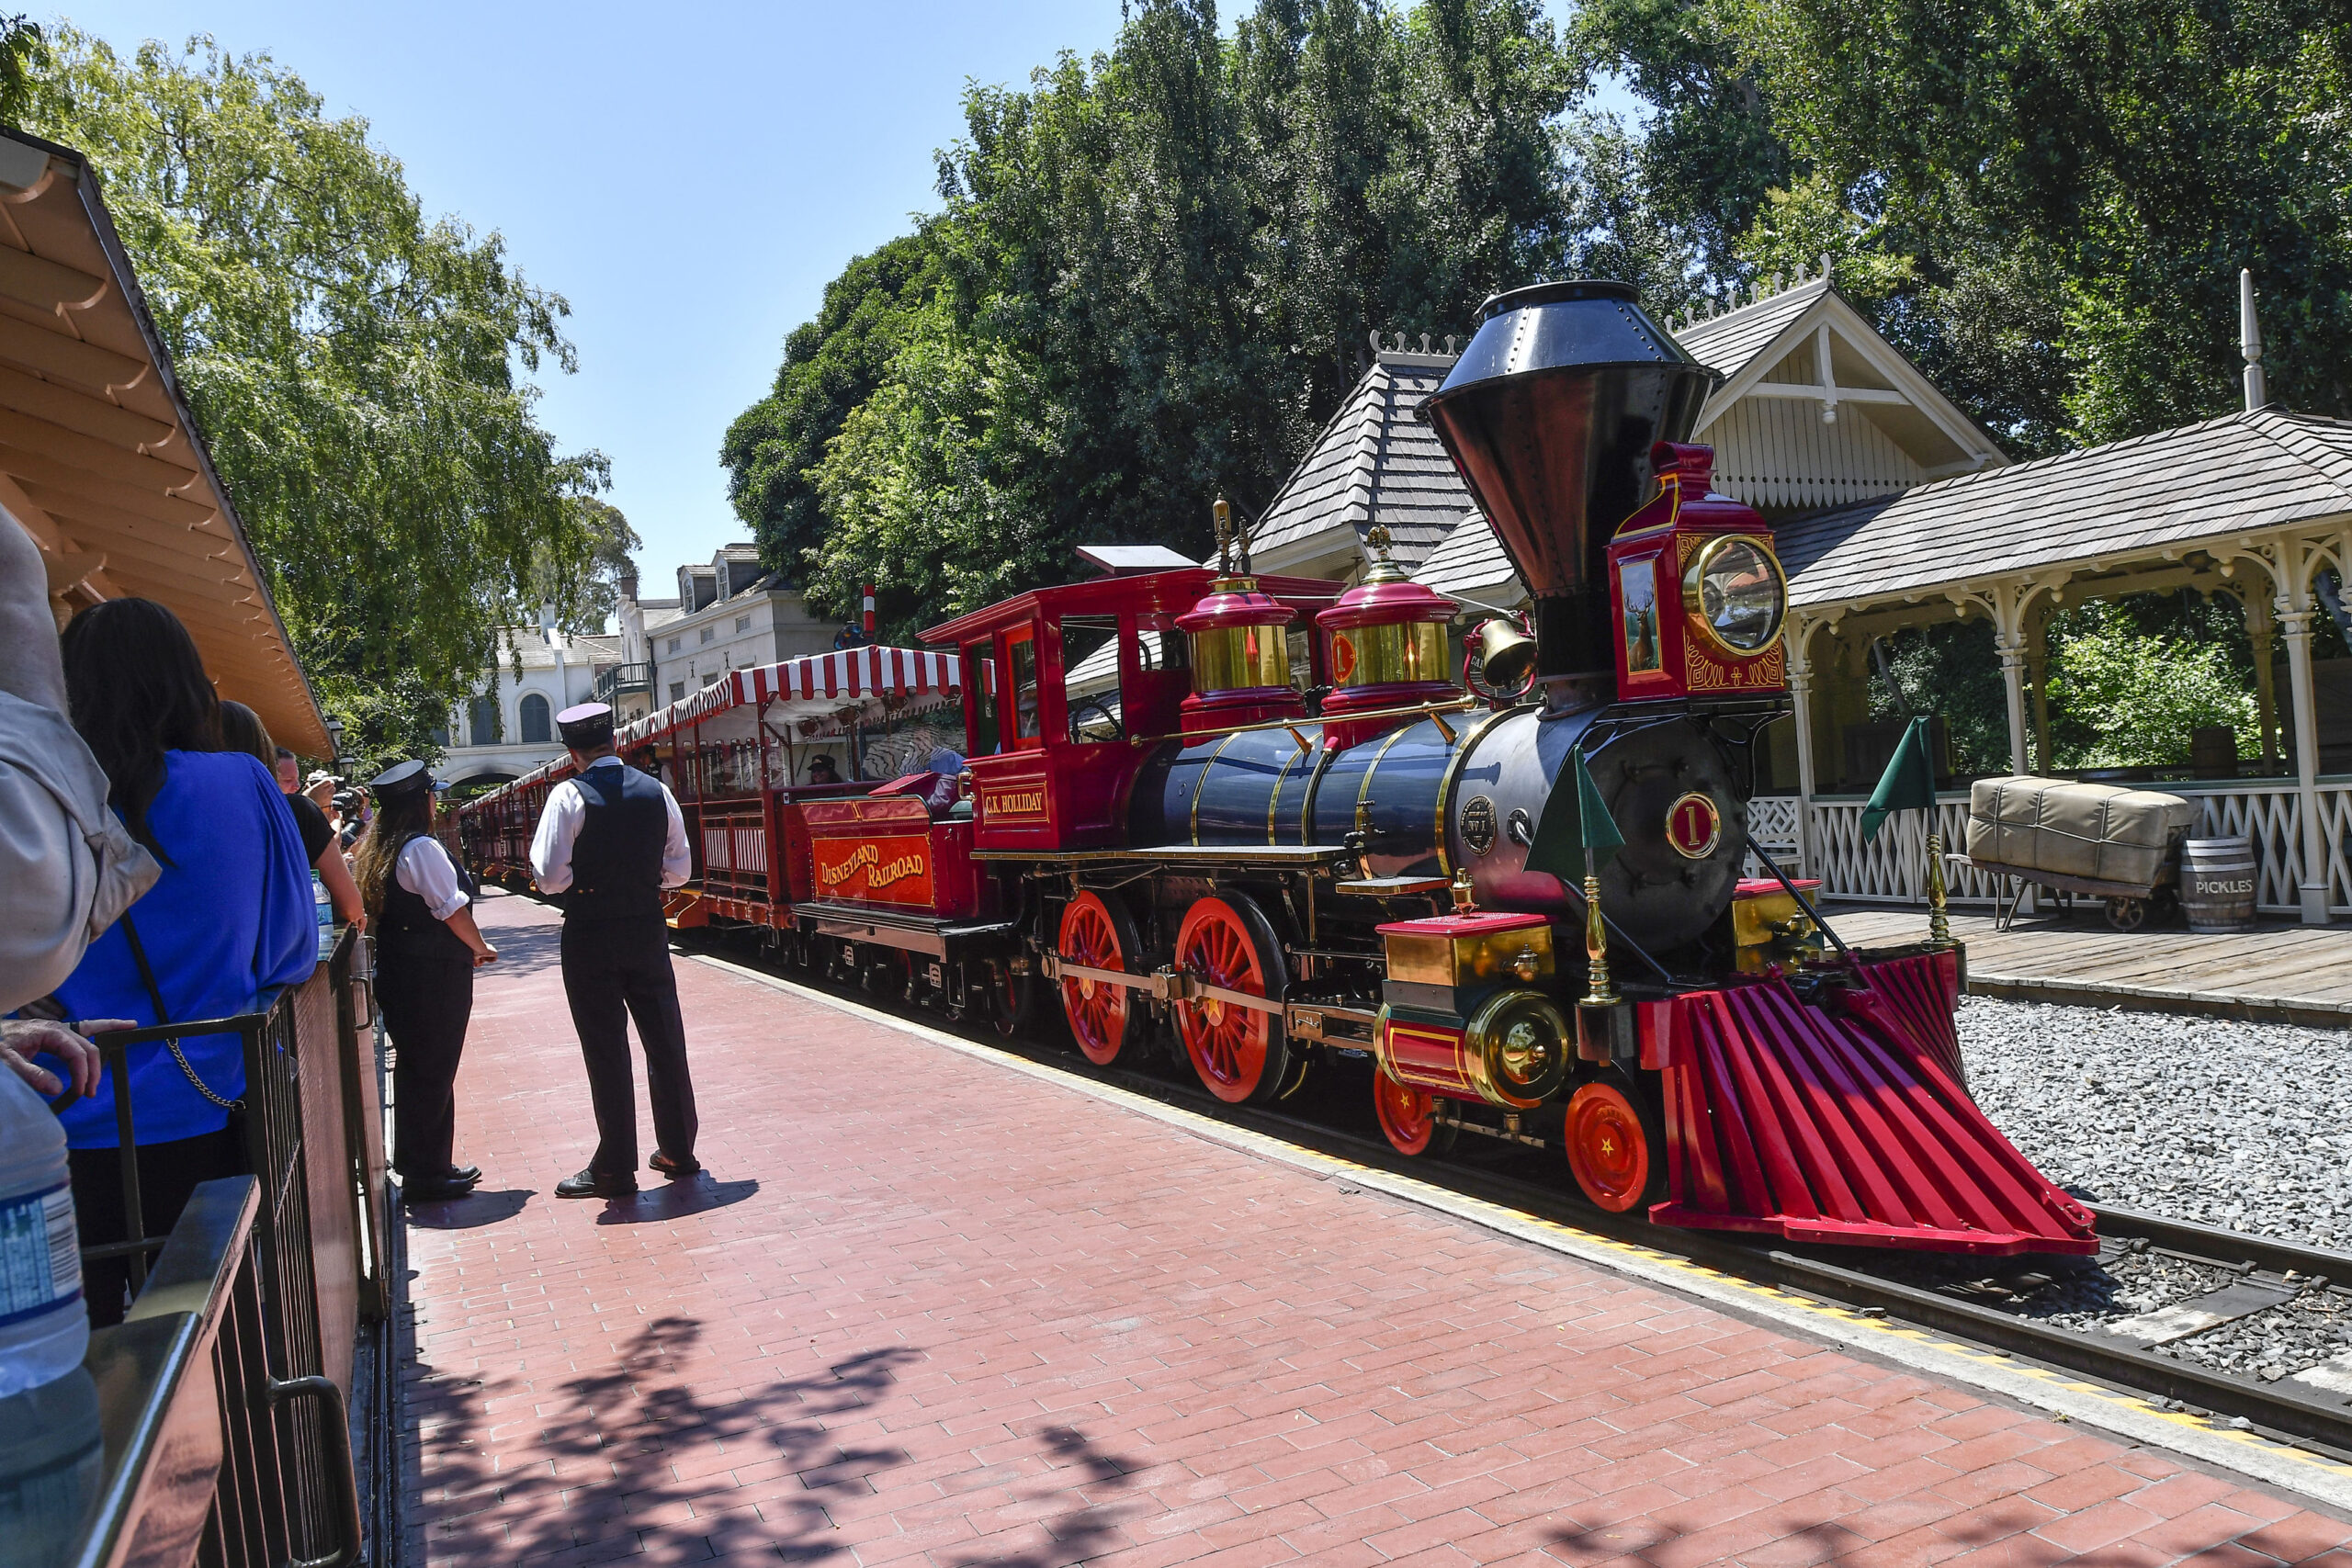 Disneyland railroad engine #1, C.K. Holliday, pulls in to the New Orleans Station at Disneyland in Anaheim, California, on Friday, July 28, 2017. (Photo by Jeff Gritchen, Orange County Register/SCNG)